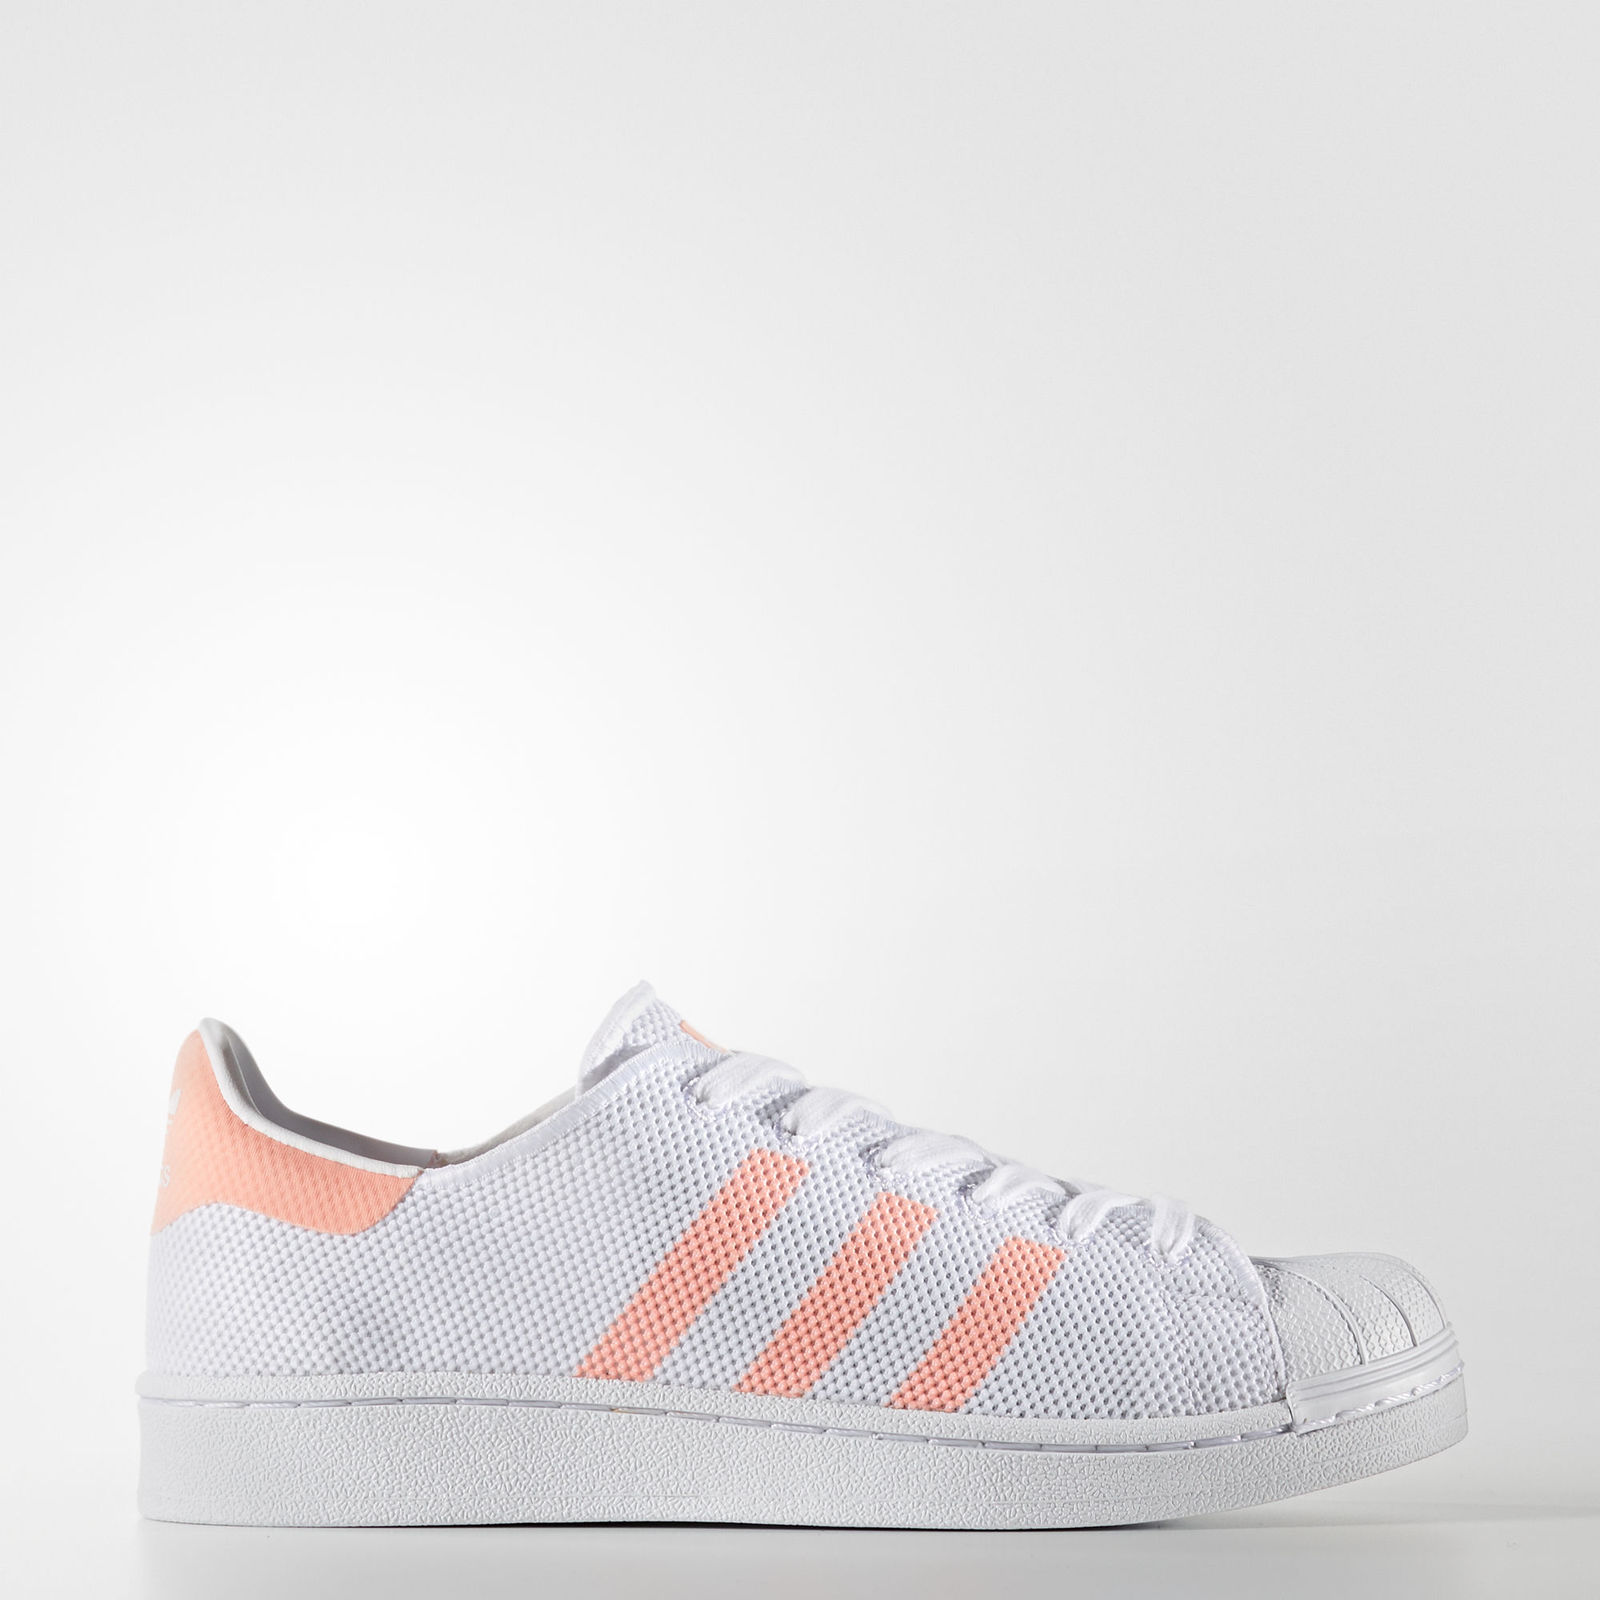 official adidas ebay store